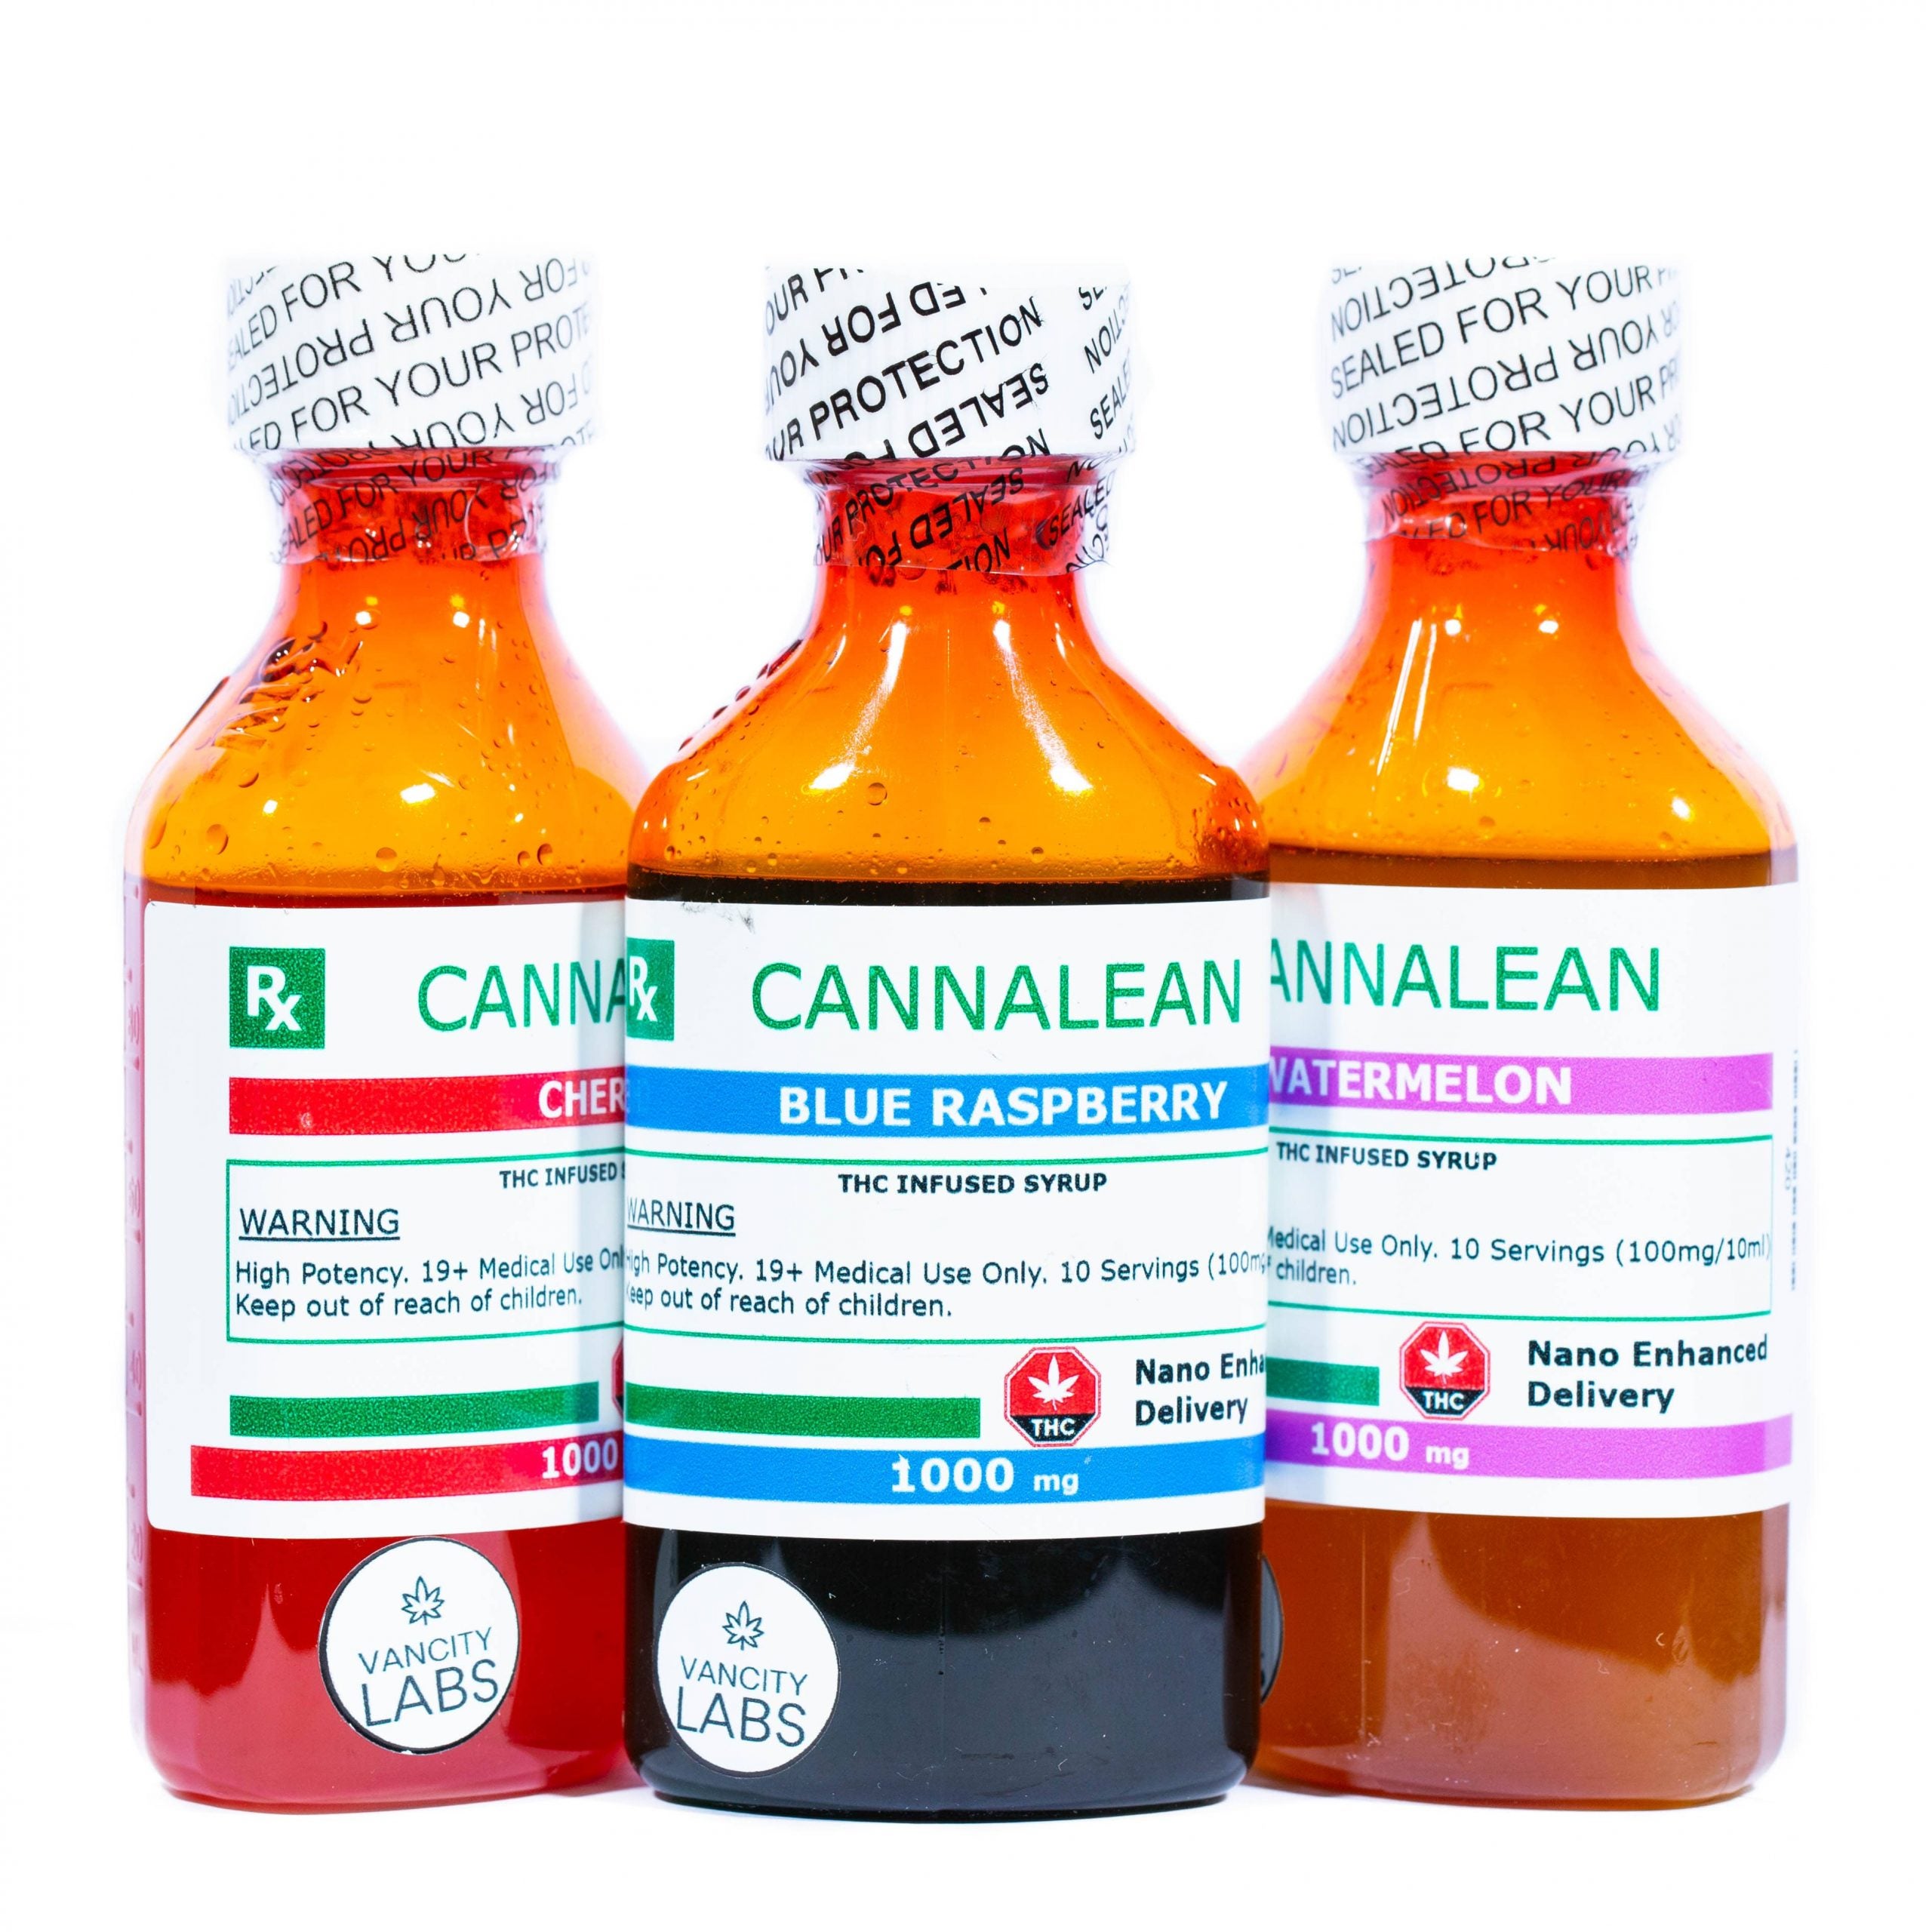 Vancity Labs - Cannalean Infused Syrup 1000mg THC of Doobdasher, Canada